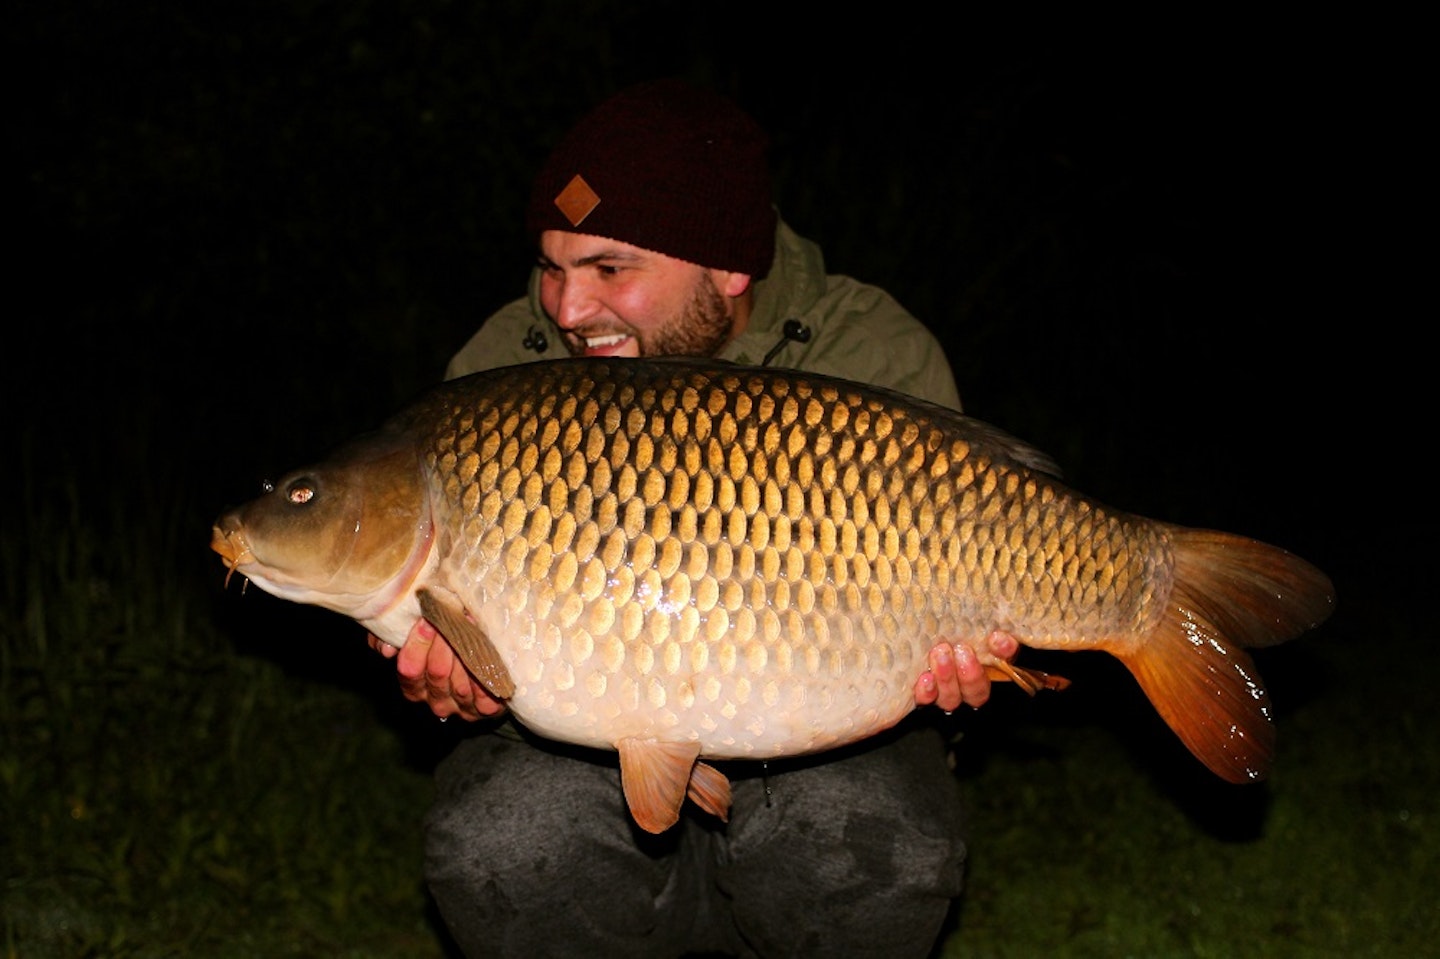 Craig Mortimer with a 28lb common